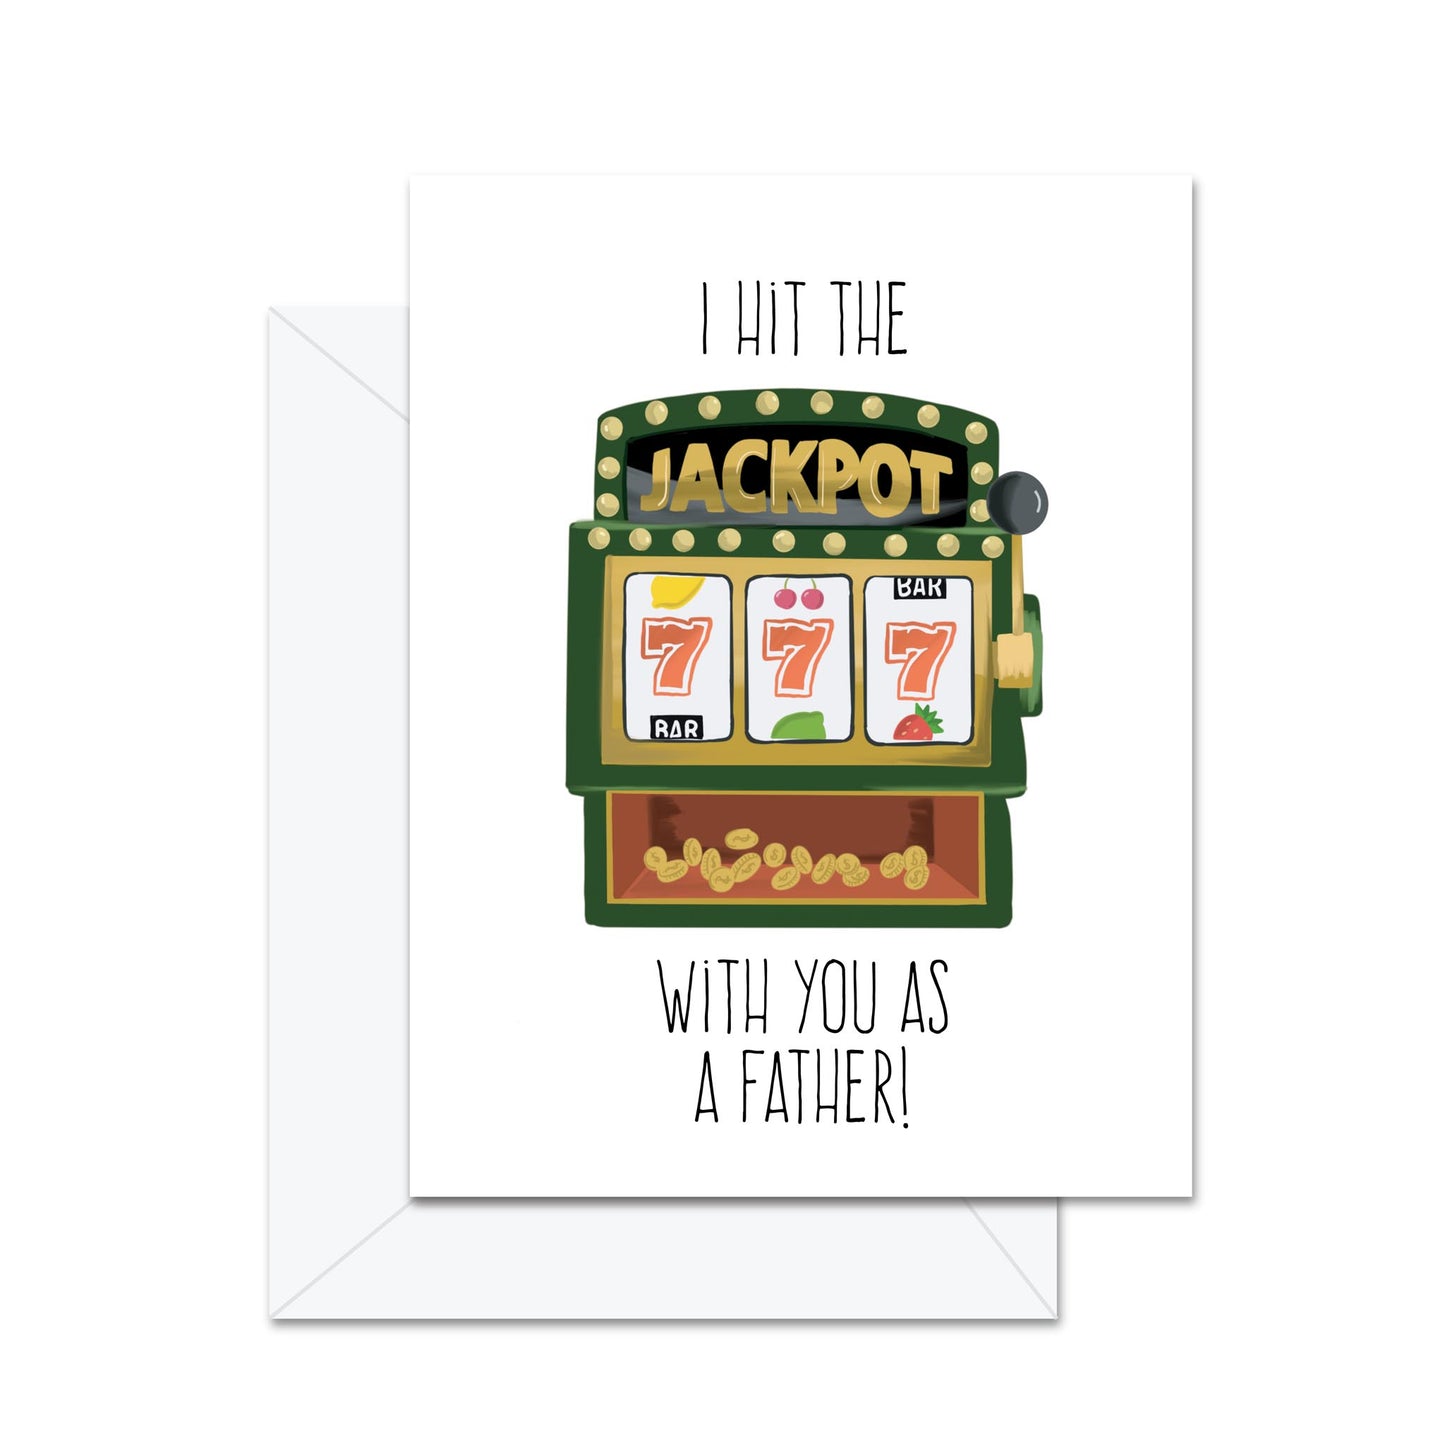 I Hit The Jackpot For You As Father! - Greeting Card